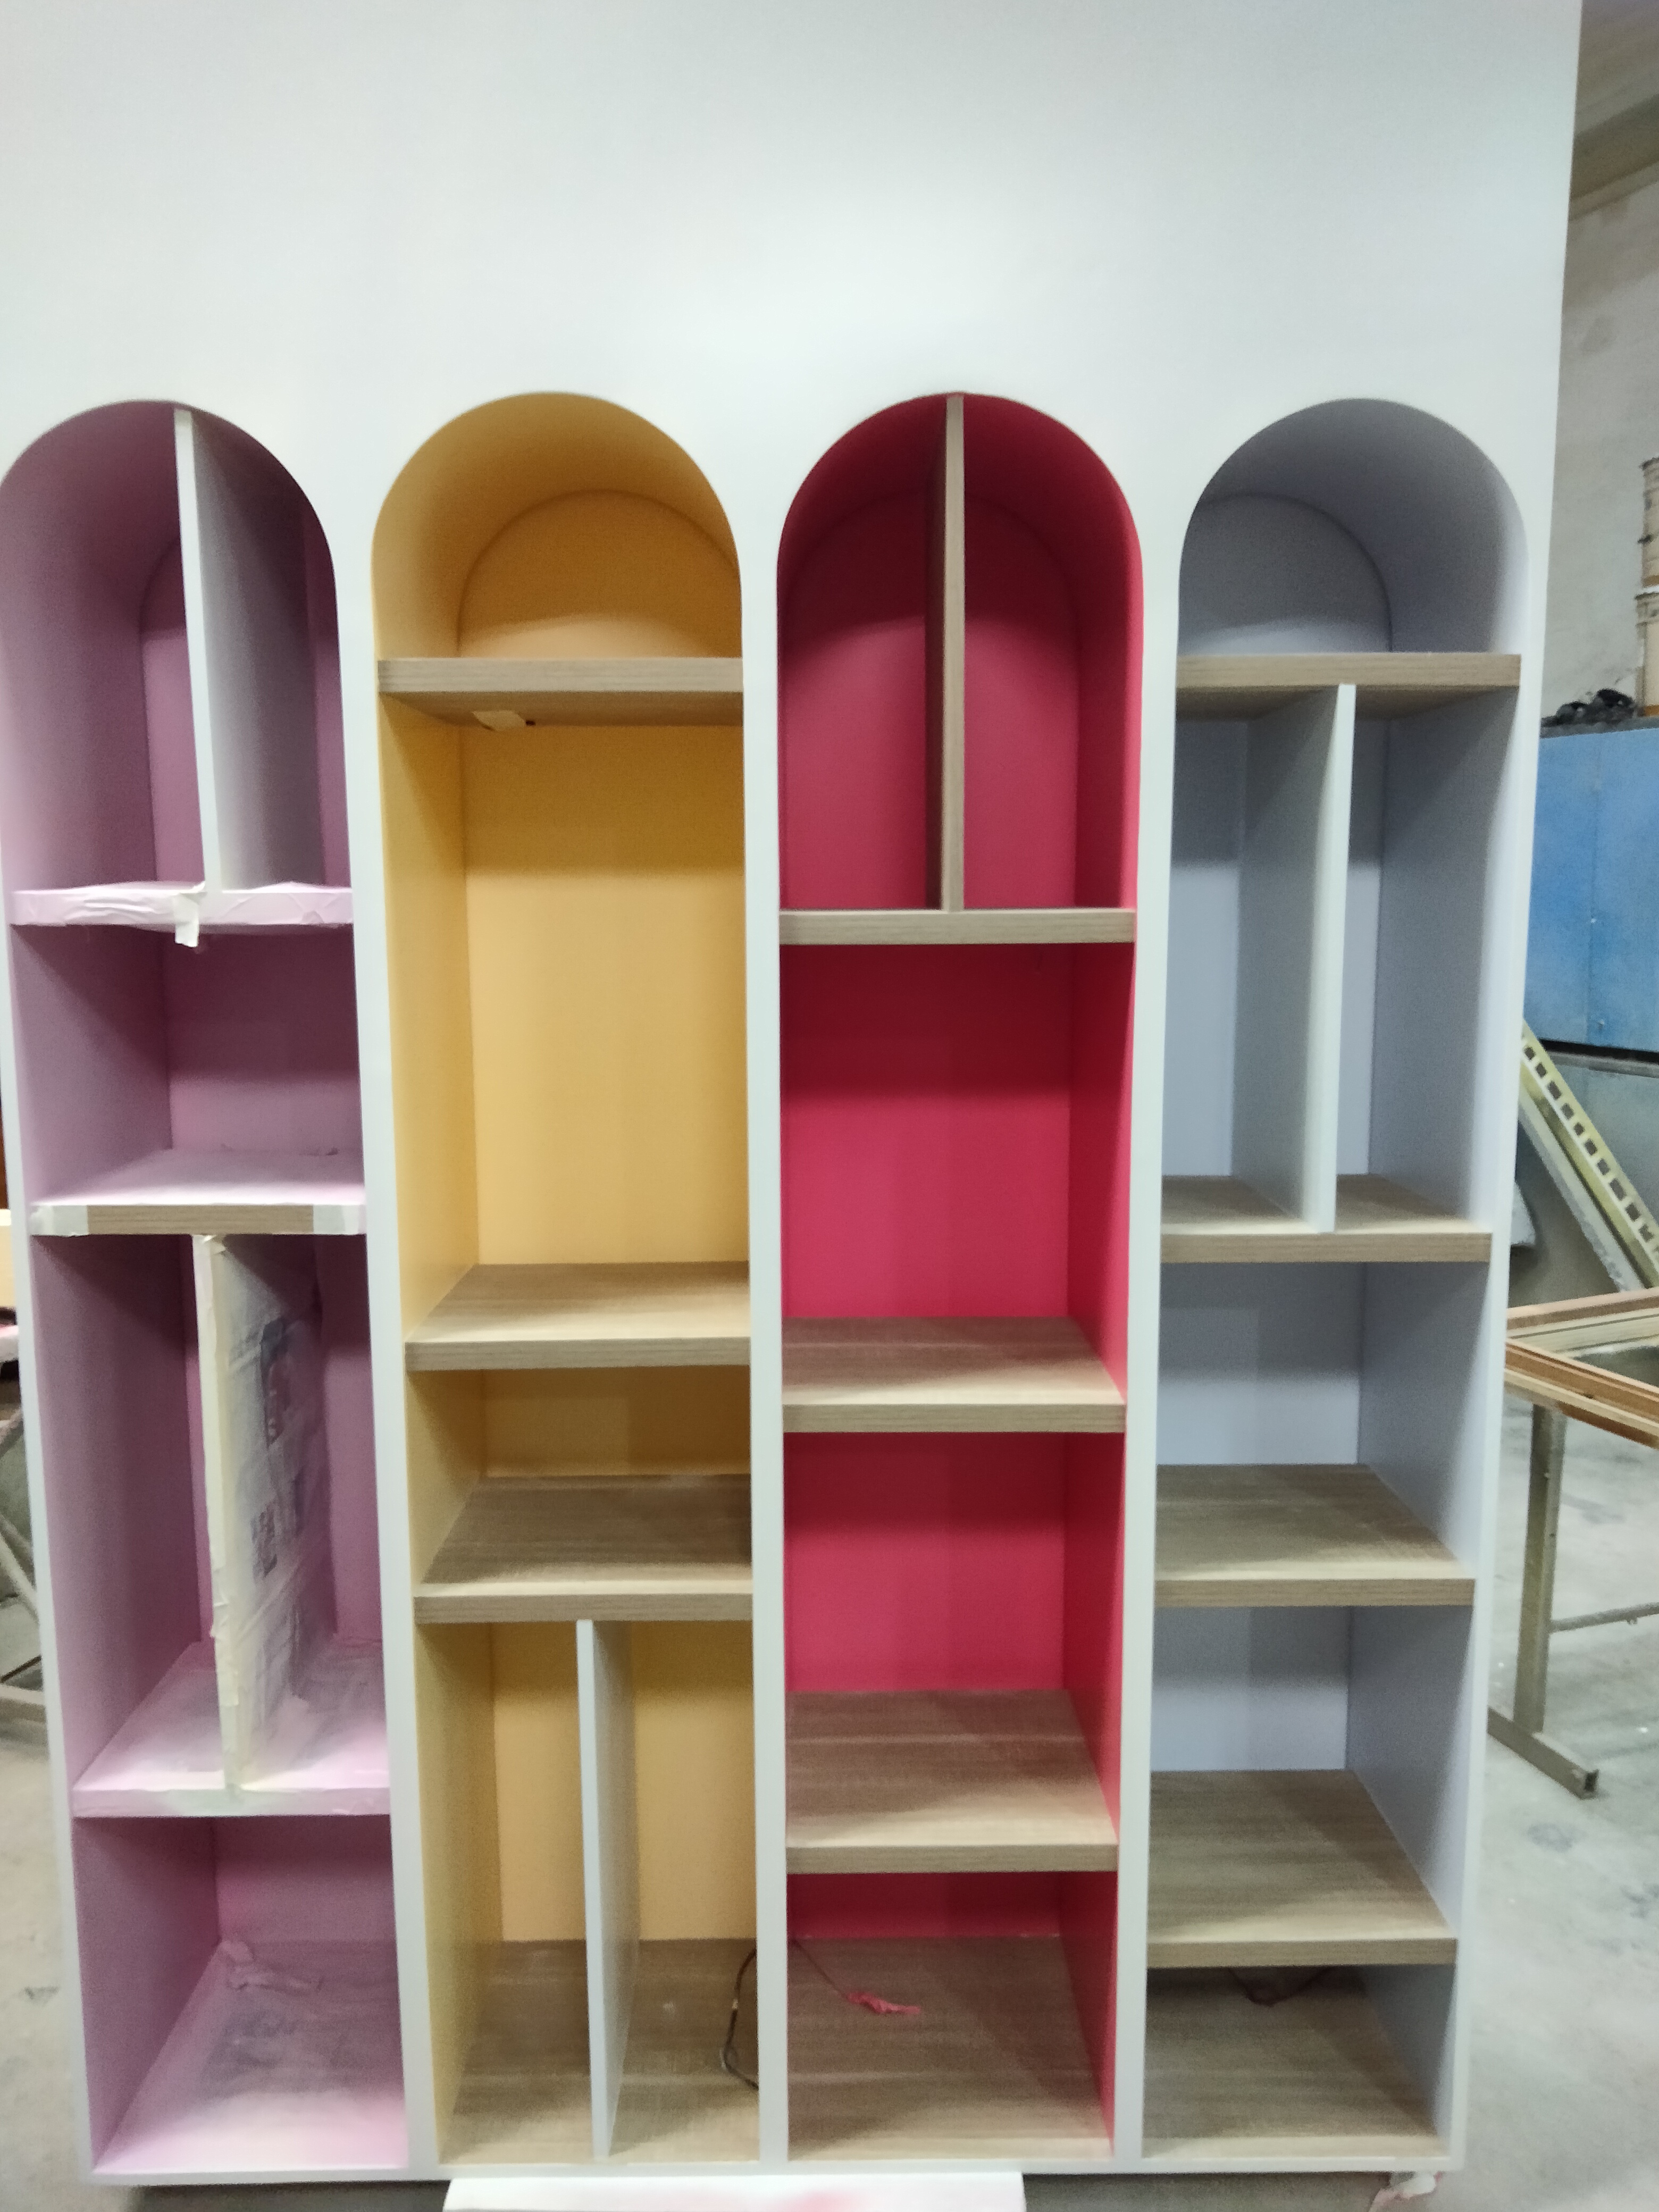 Customized Cabinet Door Spray Painting Services in Singapore (7)